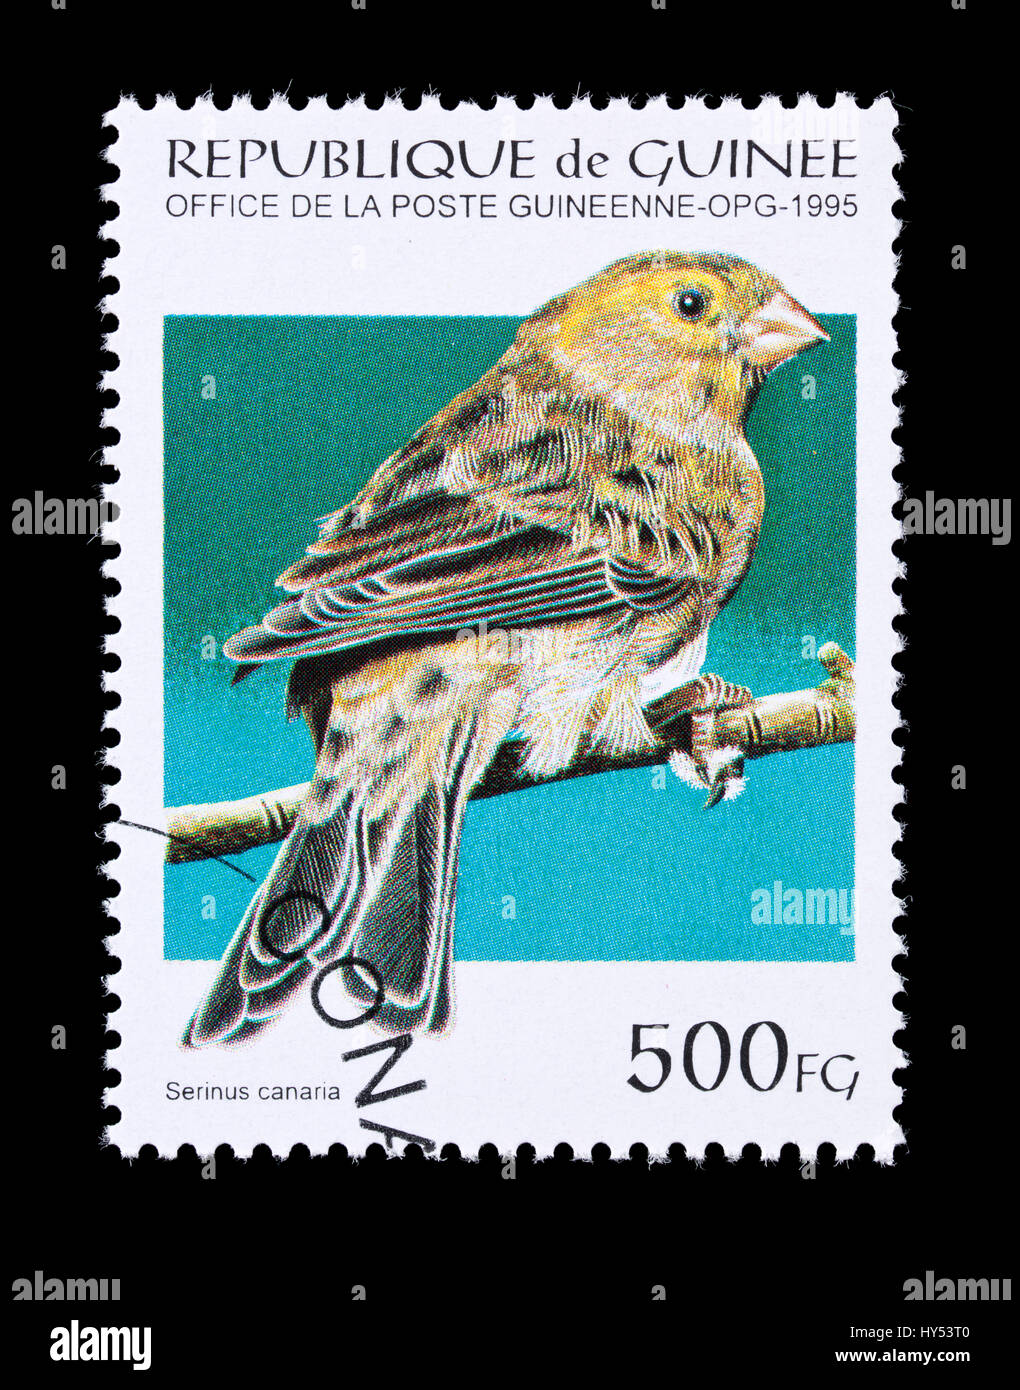 Postage stamp from Guinea depicting  Atlantic canary (Serinus canaria) Stock Photo